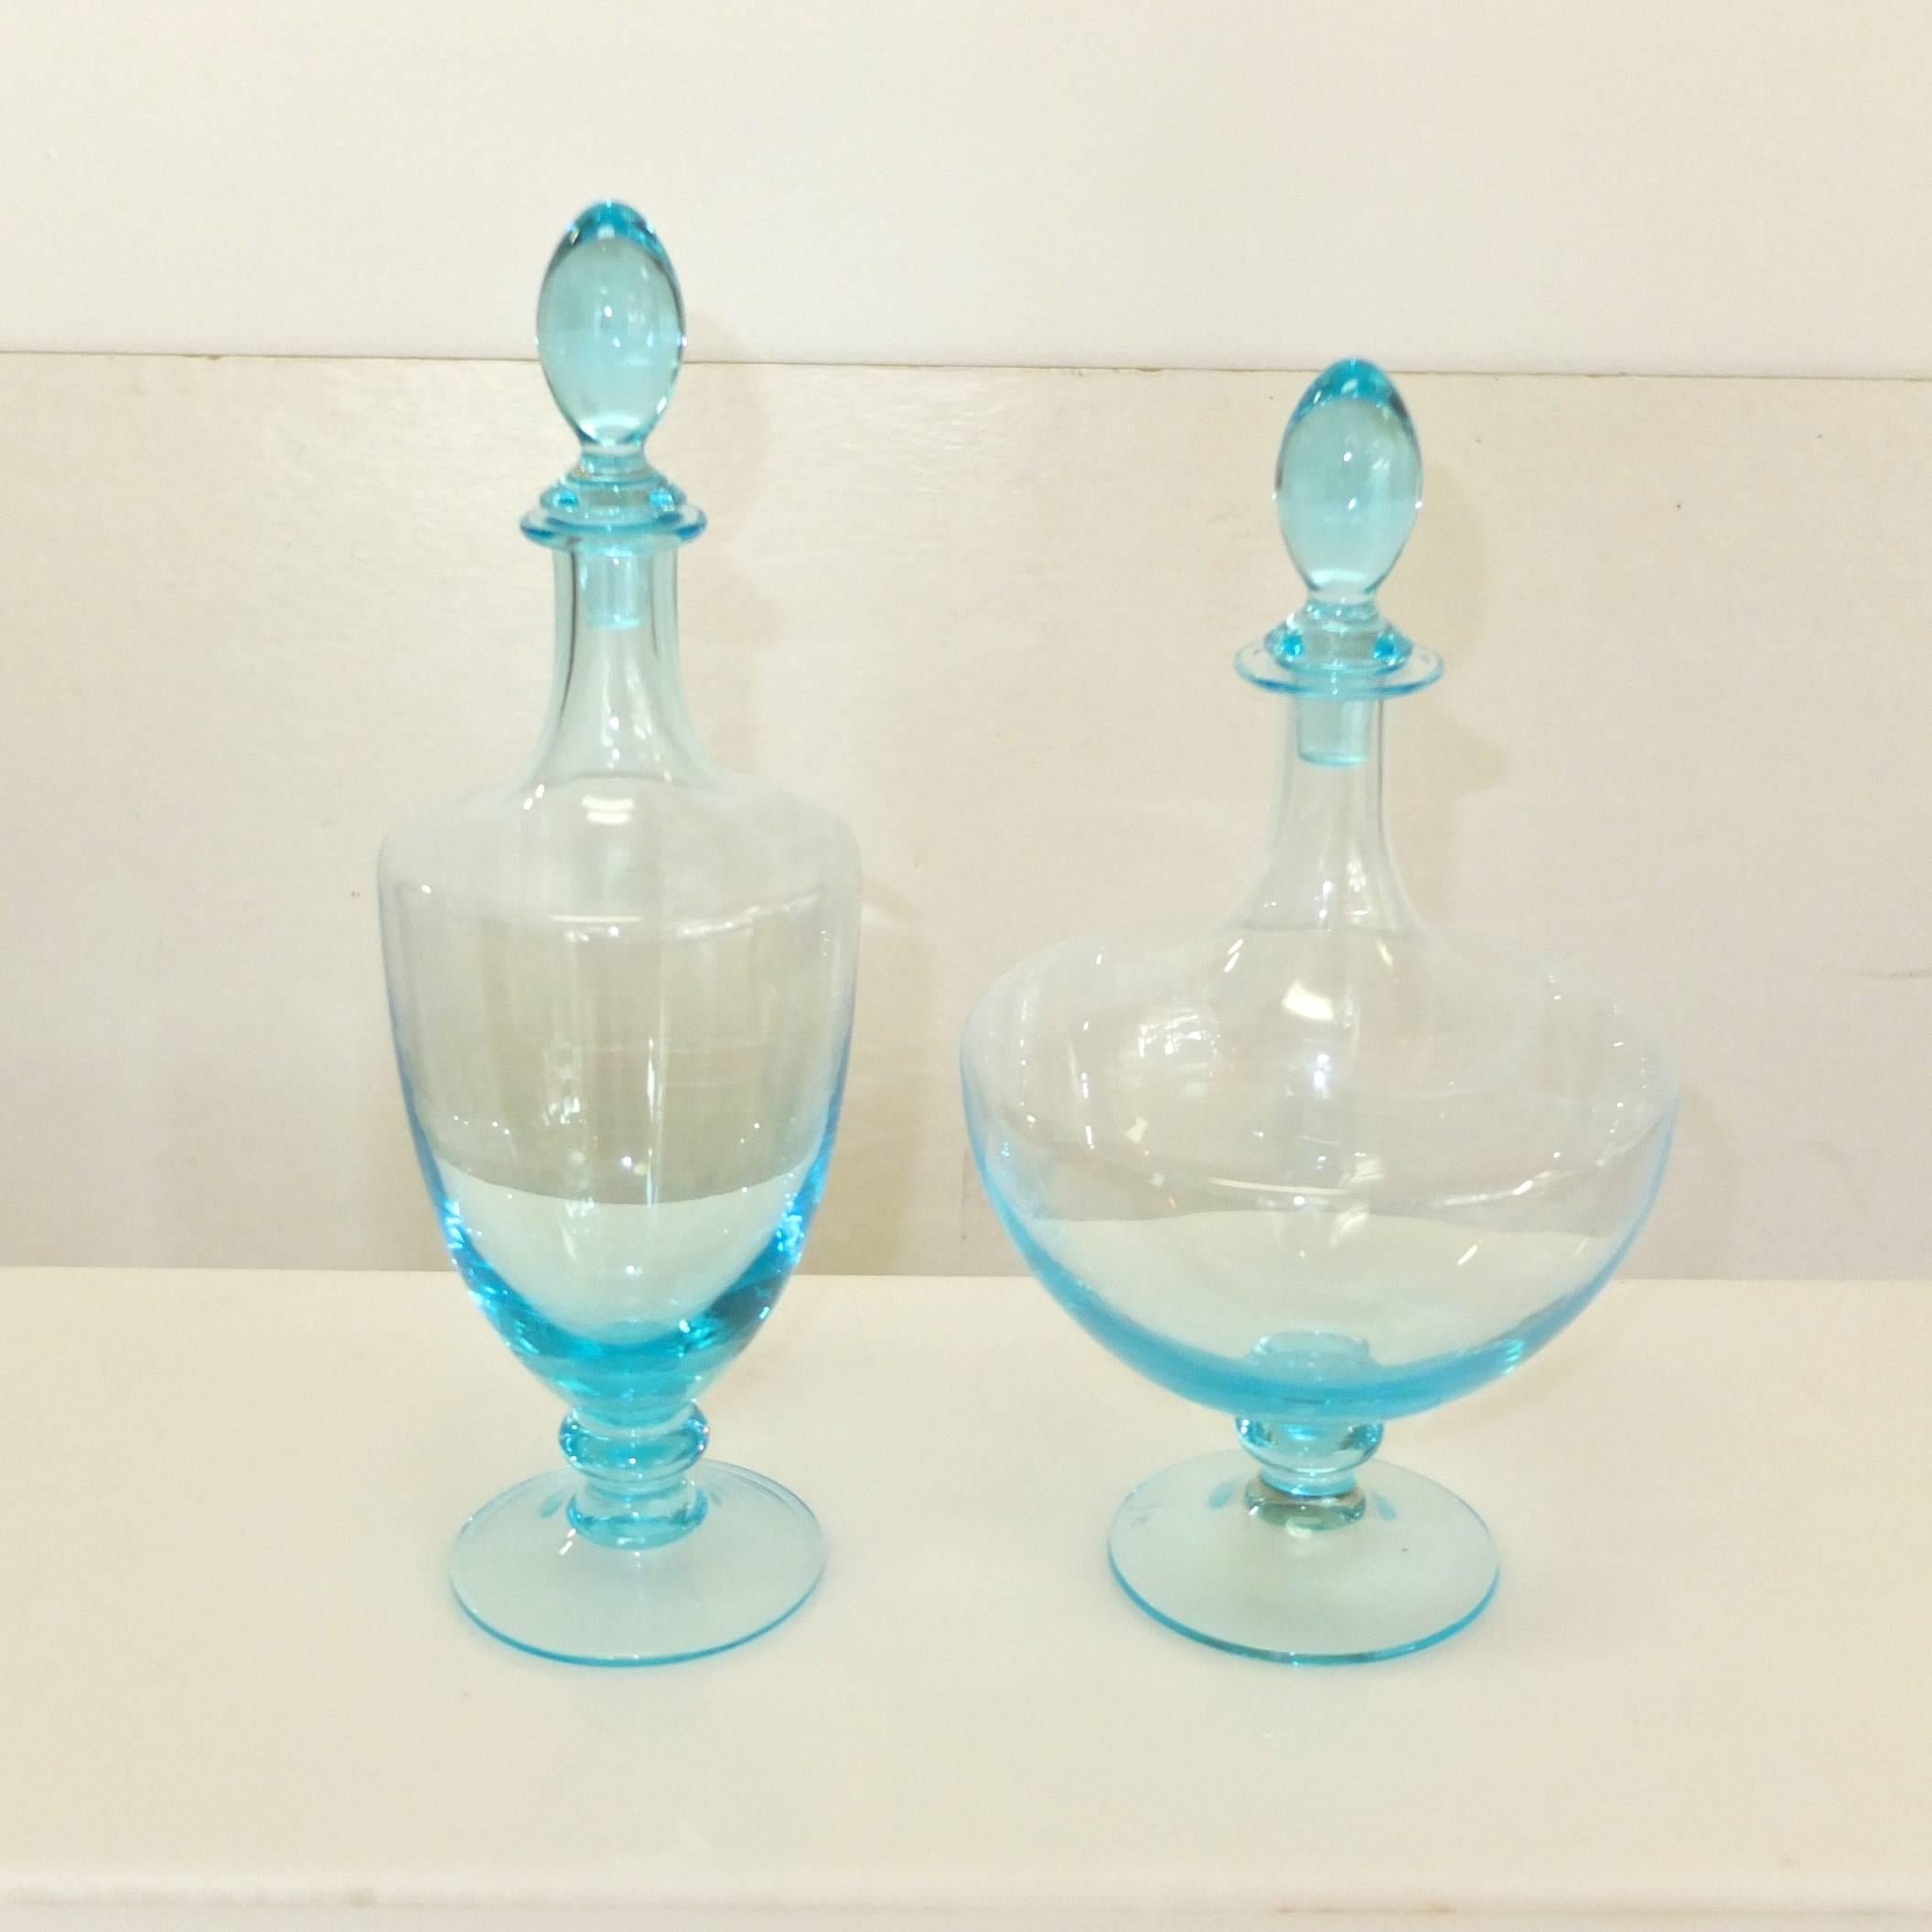 Late 20th Century Italian Signed Blue Blown Glass Decanters